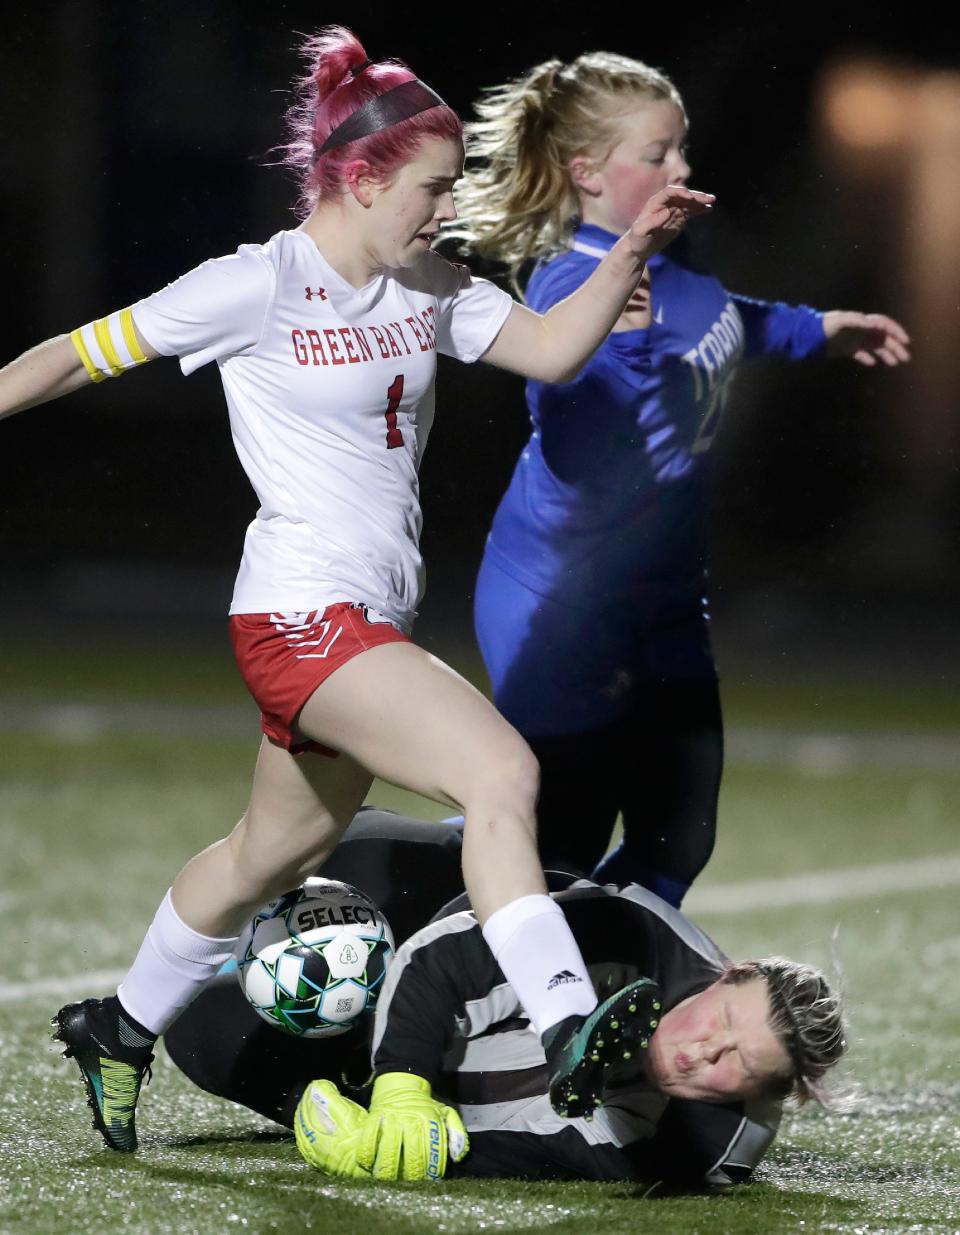 Appleton West goalkeeper AJ Jazdzewski stops a shot by Green Bay East's Ellana Gallegos as West's Gwen Konkle defends during their soccer game Thursday at West.